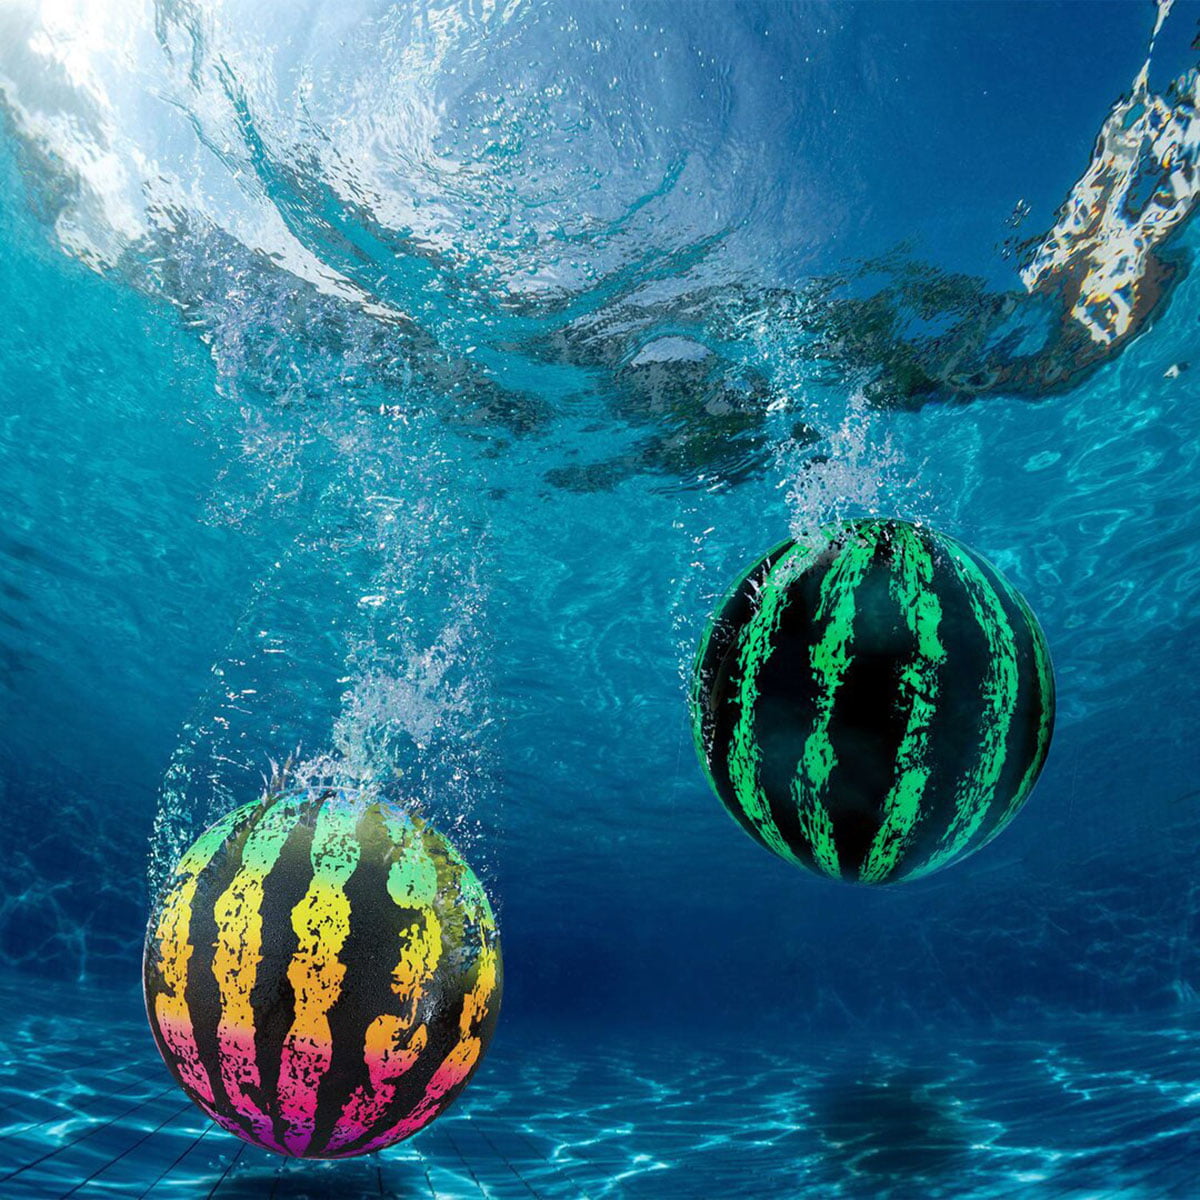 A+B Water Bouncing Summer Beach Ball Balls Fills with Water Swimming Pool Balls Watermelon Inflatable Ball Under Water Passing Dribbling Diving and Pool Games for Teens Kids Adults 